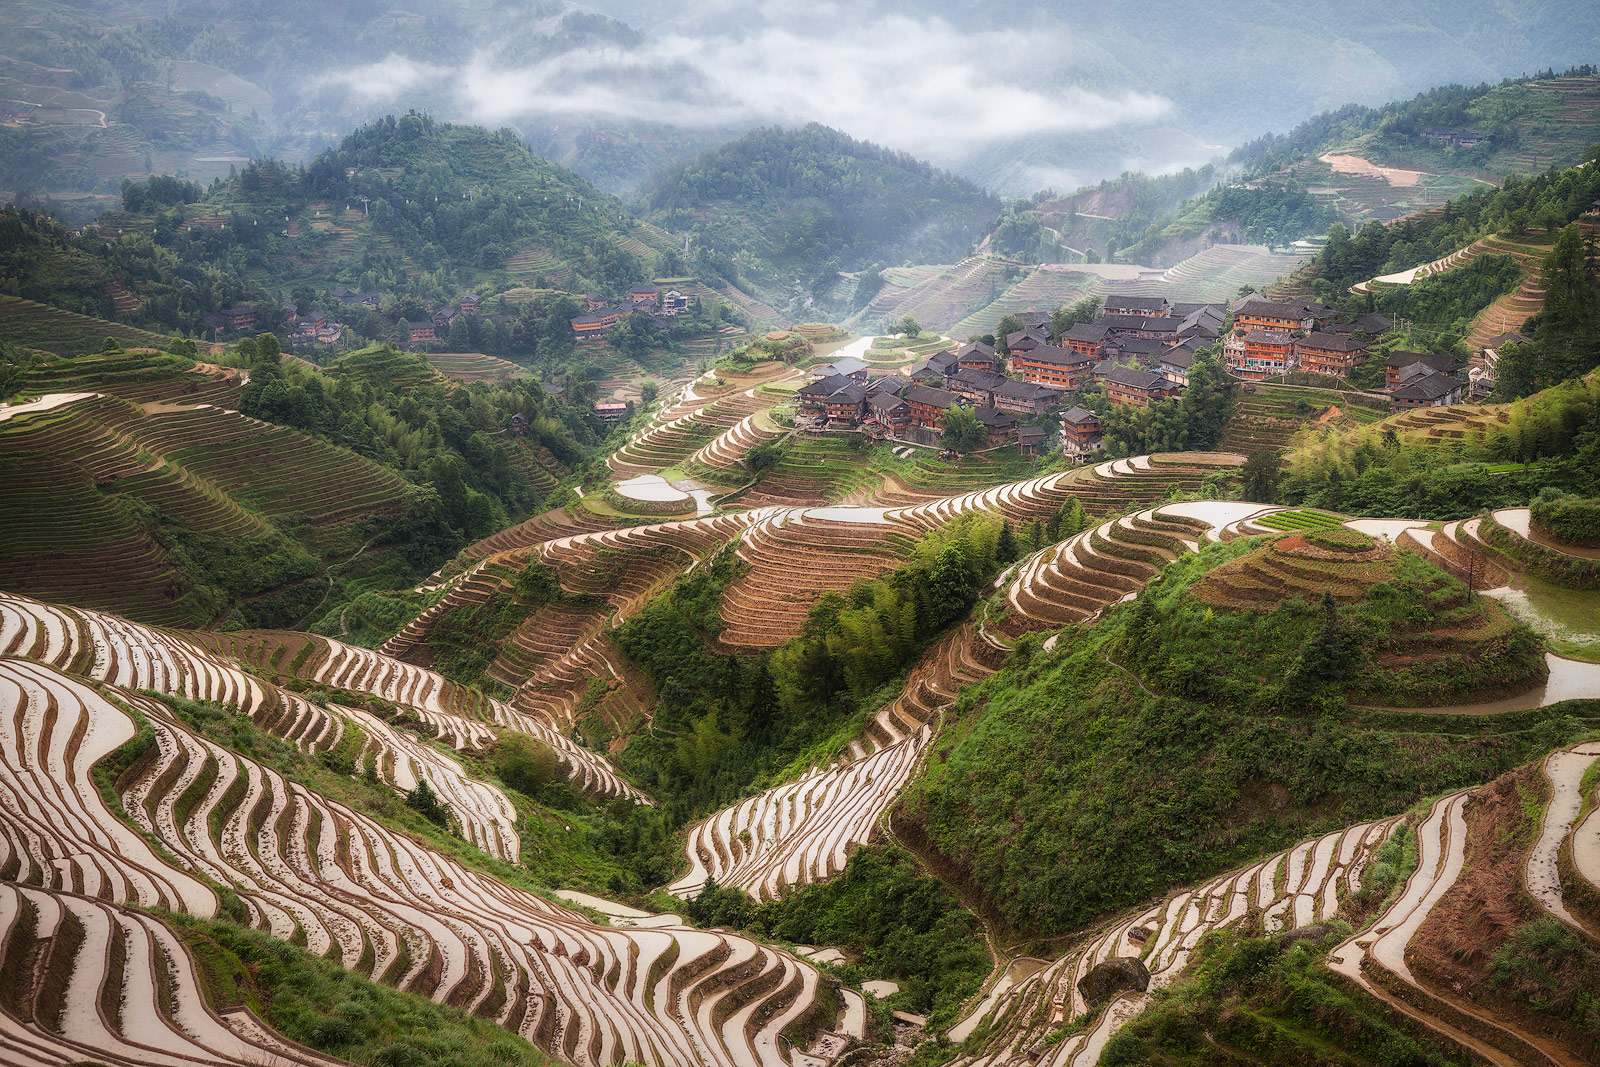 Clouds moving in over the Longji Rice Terraces shortly after sunrise.